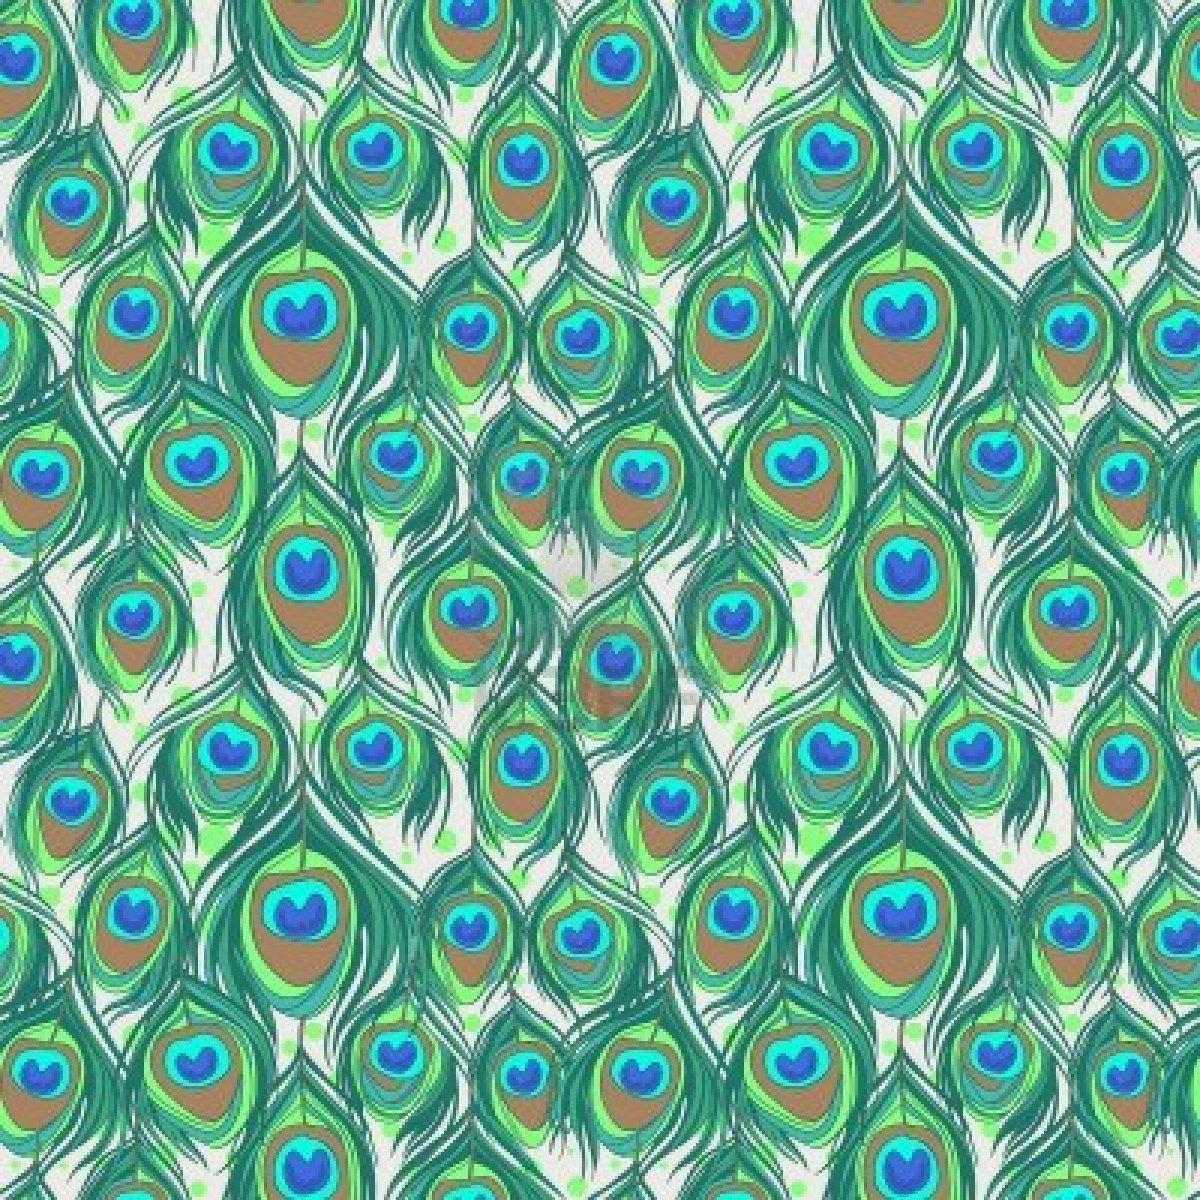 Gallery For Peacock Feathers Pattern Displaying Image